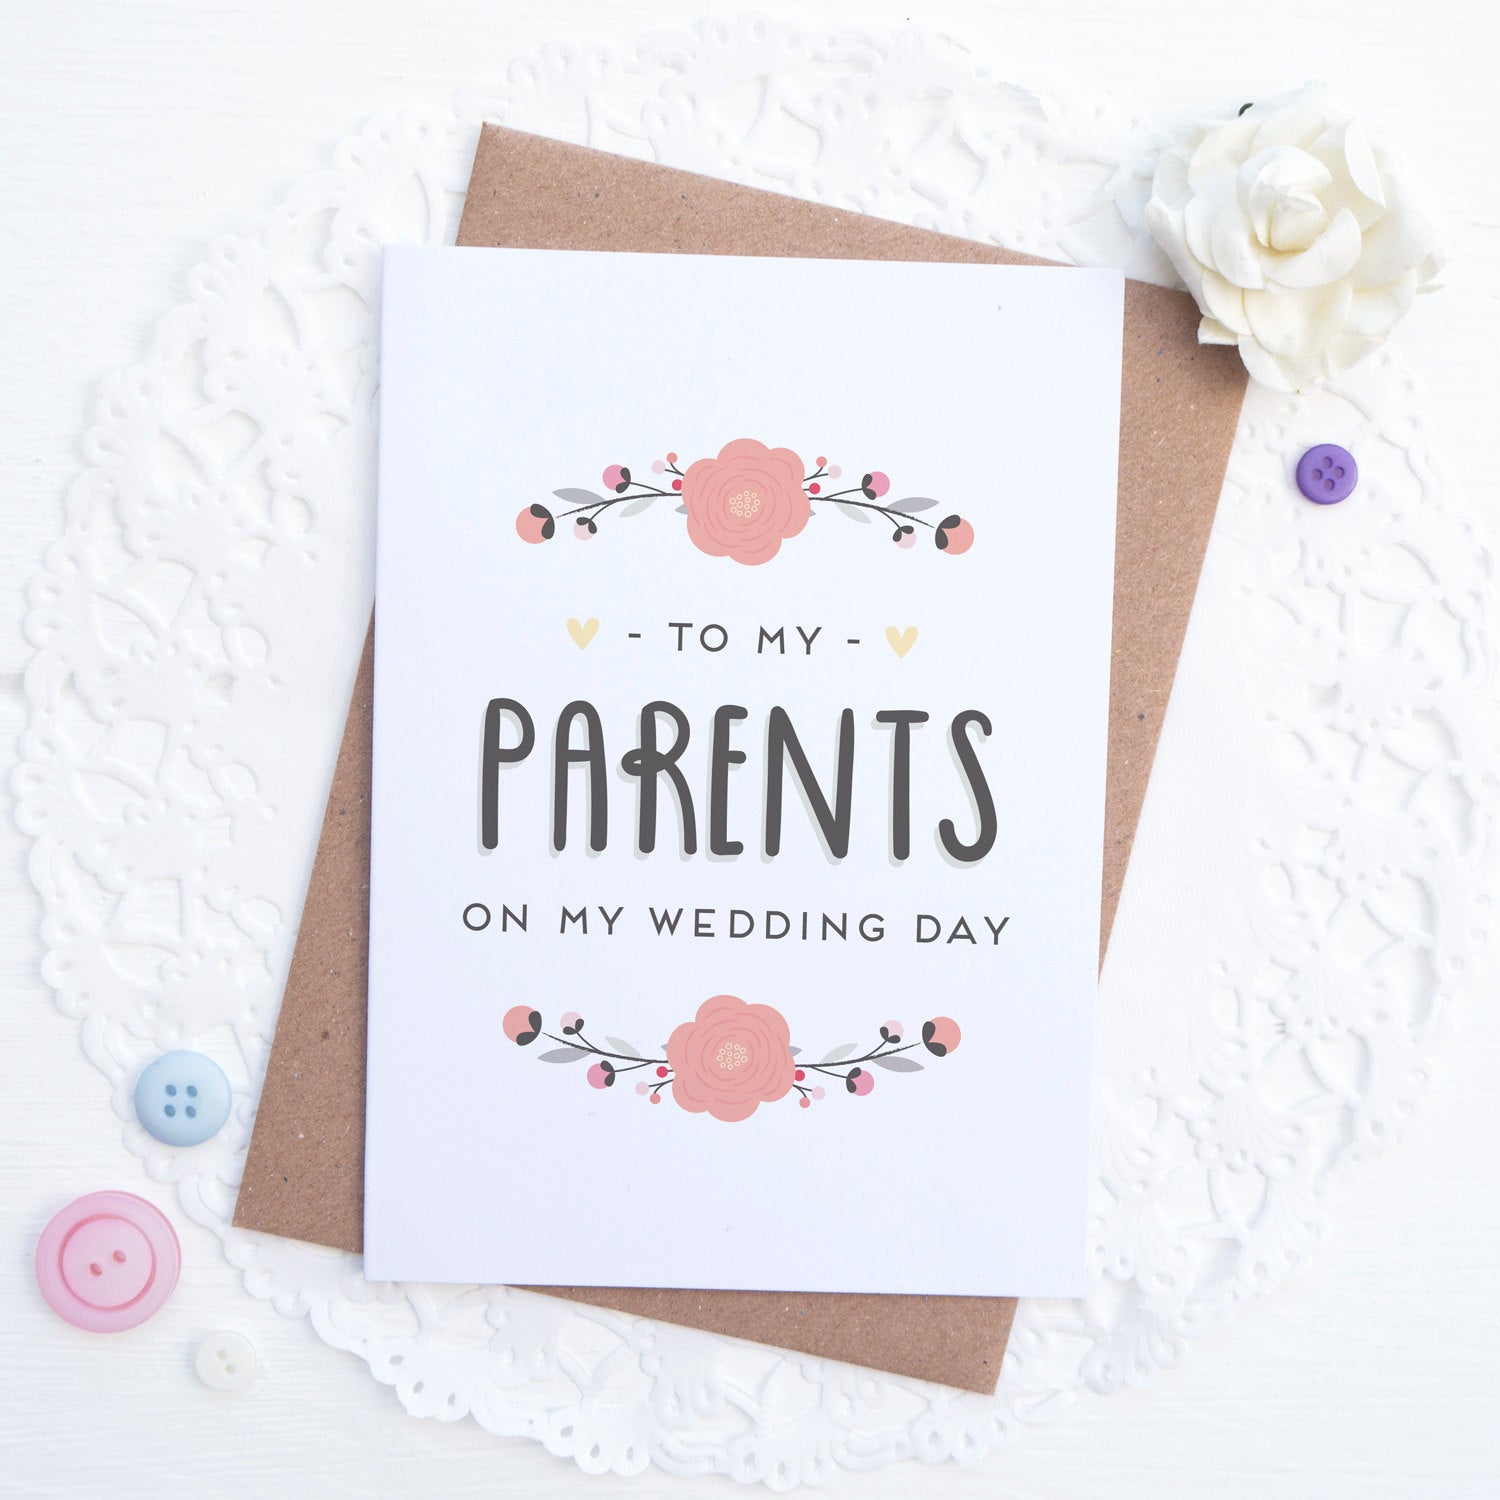 To my Parents on my wedding day card in pink